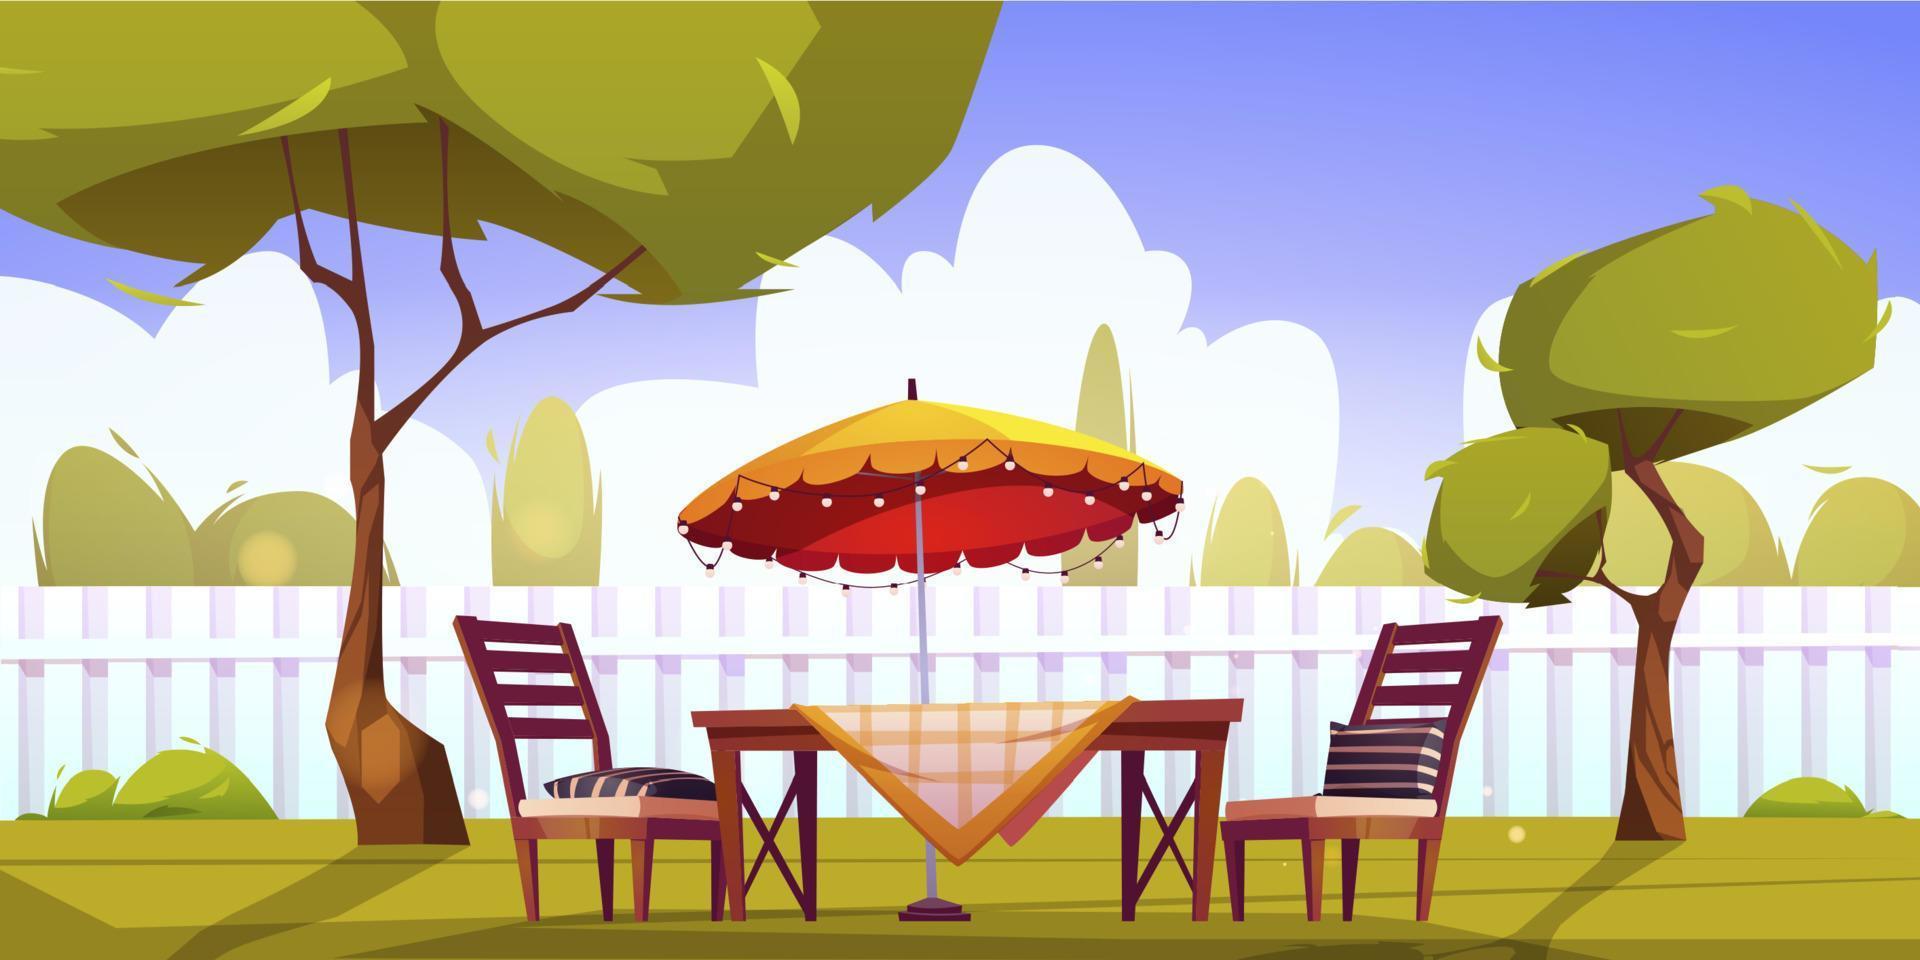 Backyard with fence, table, chairs, umbrella vector